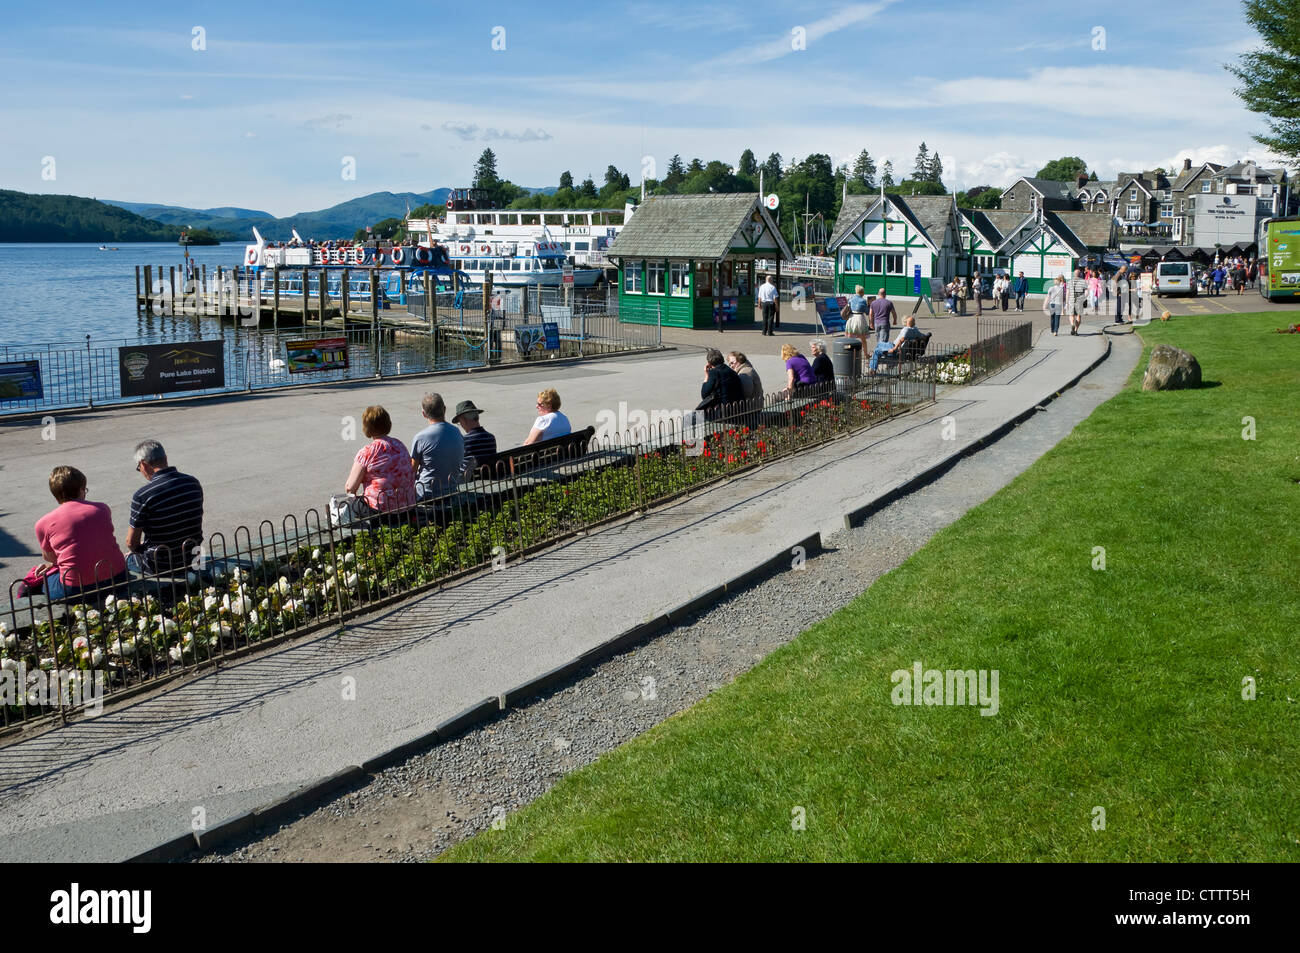 People visitors tourists on the promenade overlooking Lake Windermere in summer Bowness-on-Windermere Cumbria England UK United Kingdom Great Britain Stock Photo